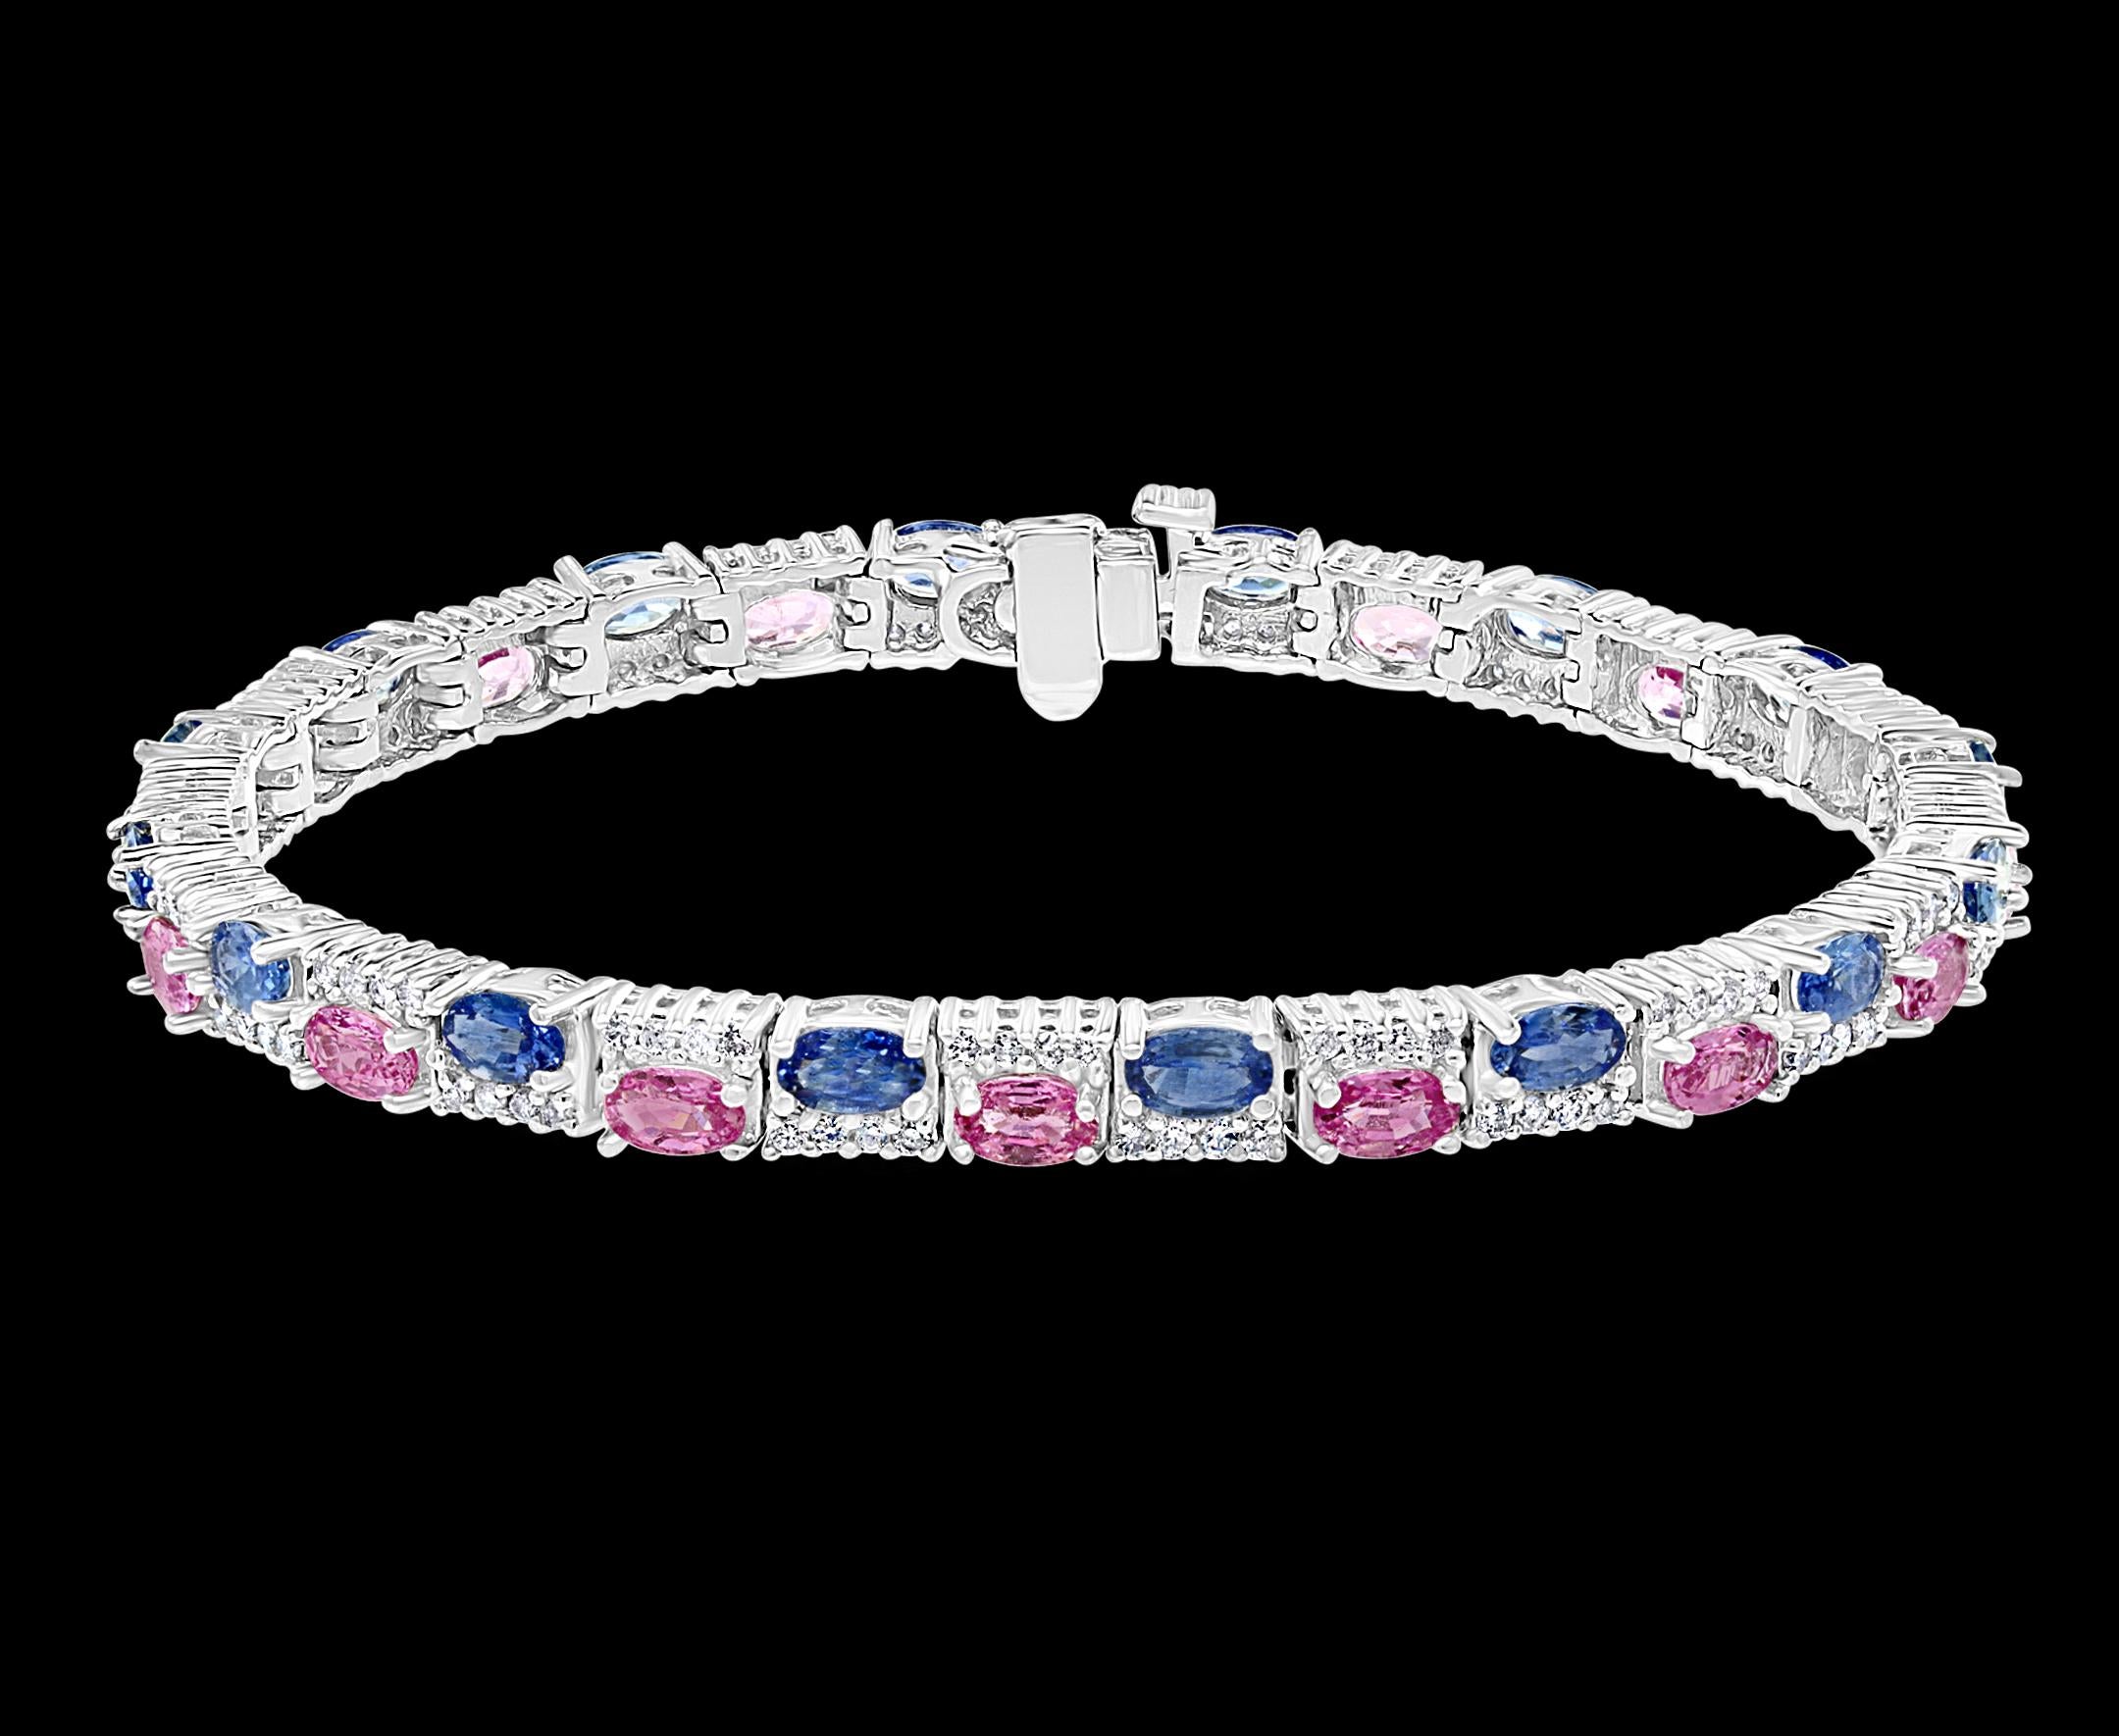  This exceptionally affordable Tennis  bracelet has  16 Pink Sapphires and 16 Blue sapphires.
Total stones of oval Sapphires  32
 Sapphires  colors are Pink, Blue, 
Beautiful colors , very Vibrant
Size of the stone is approximately 5X3 mm
Total